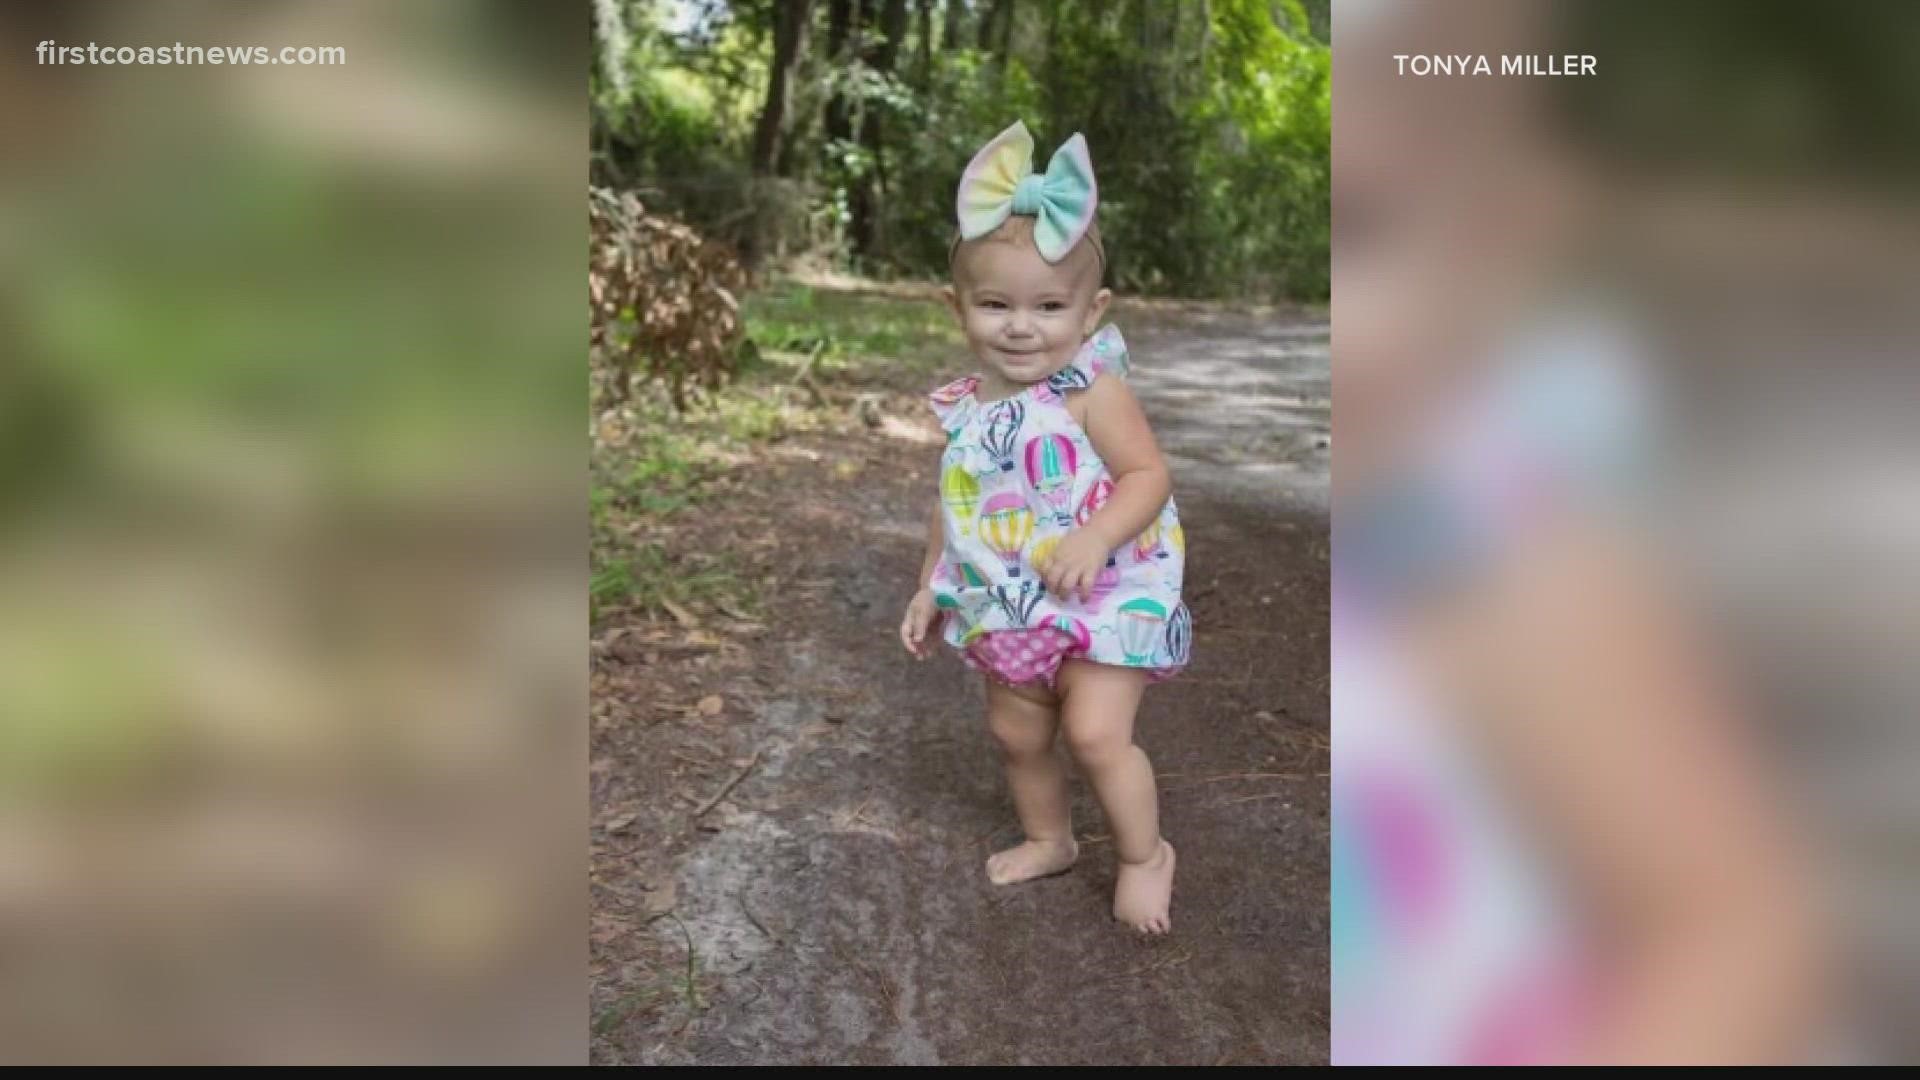 A family member says Bridgette’s husband ran inside to try and save her and their child, but was unsuccessful. He's being treated for burns in Gainesville.